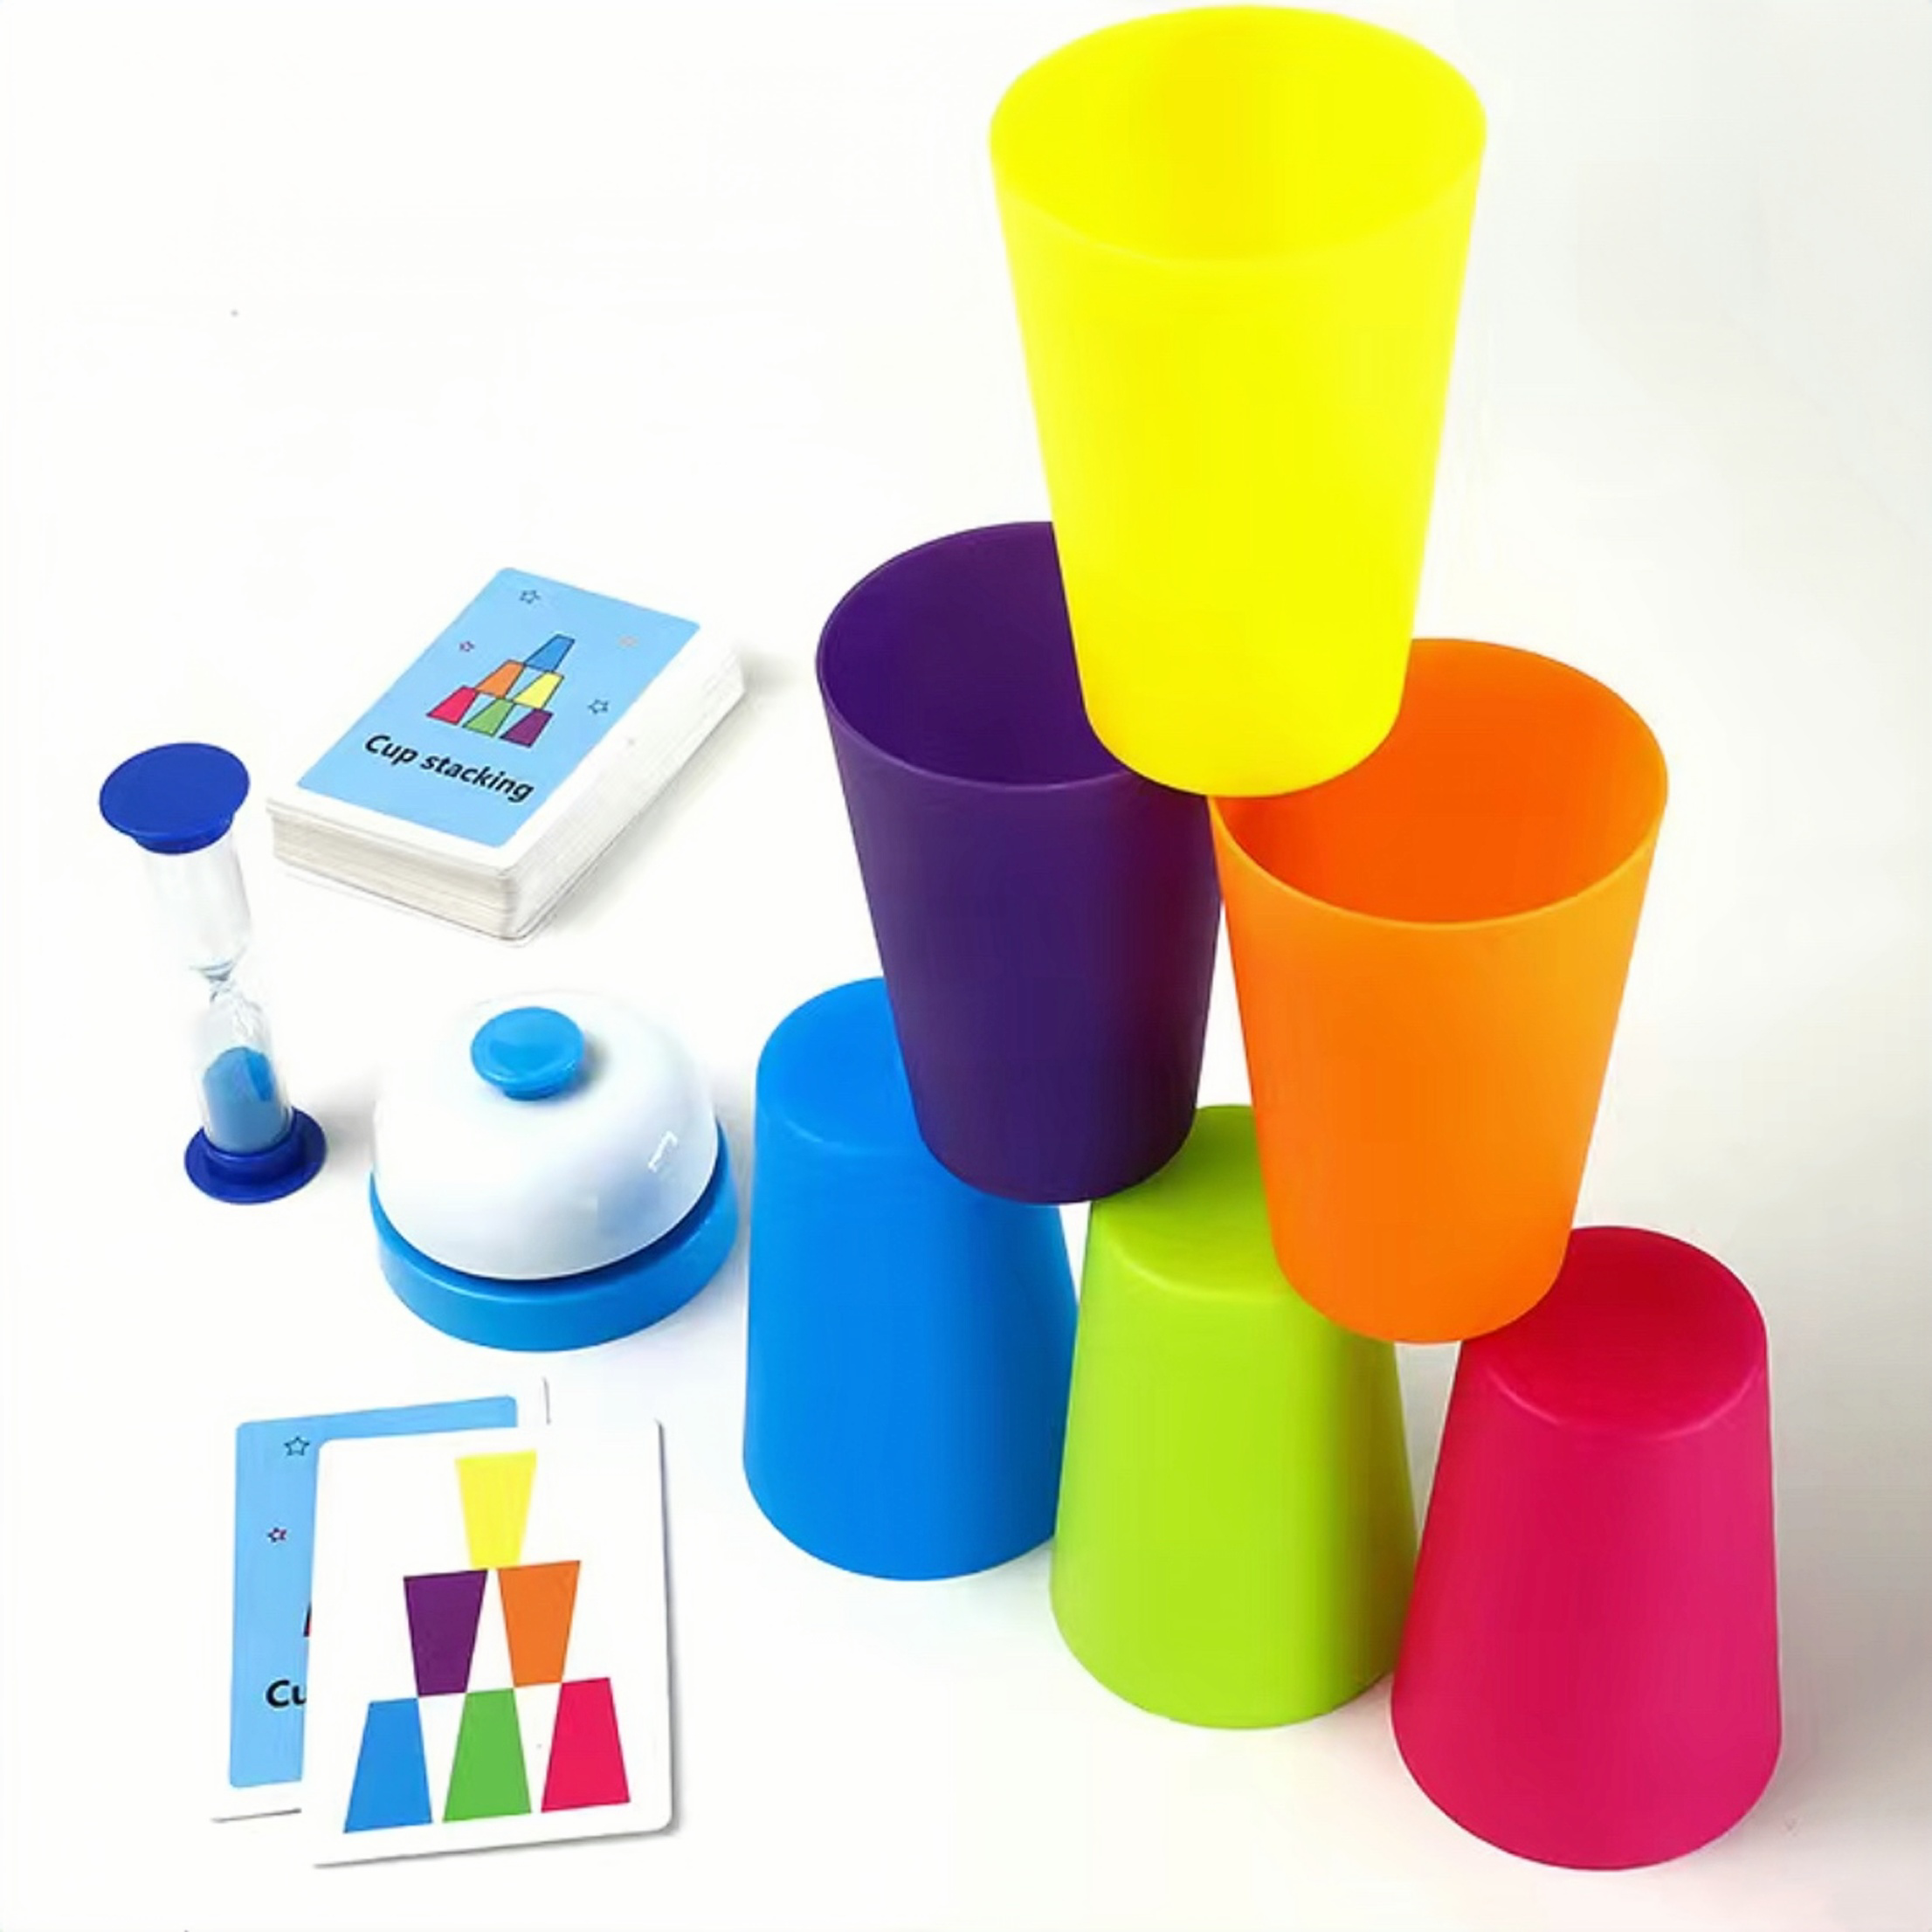 Creative Design - Plastic Stacking Cups: More Than Just Cups, They're Growing Companions!